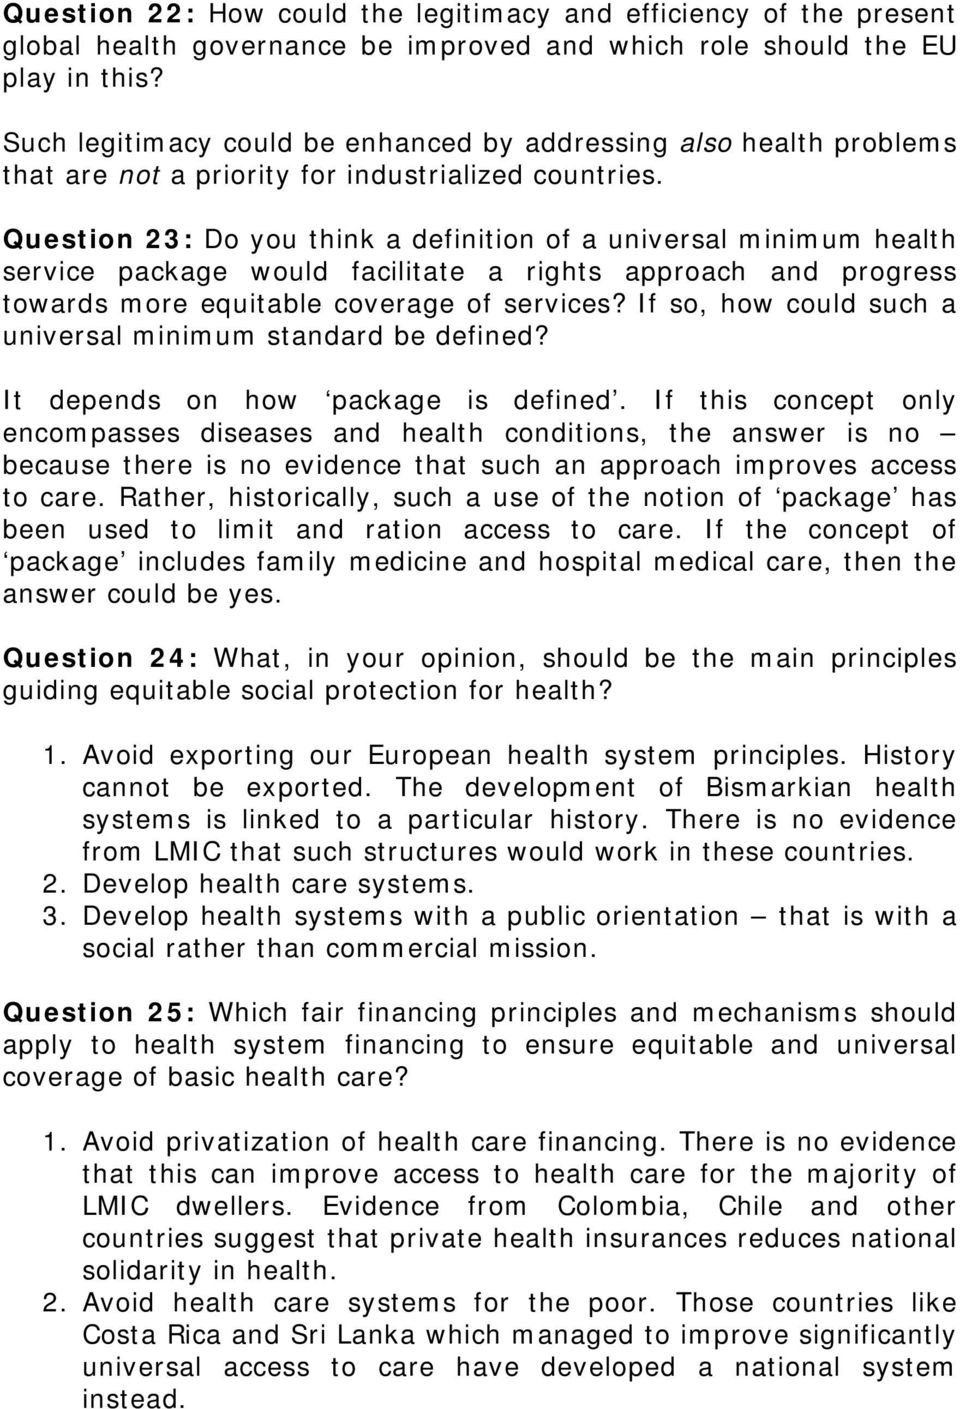 Question 23: Do you think a definition of a universal minimum health service package would facilitate a rights approach and progress towards more equitable coverage of services?